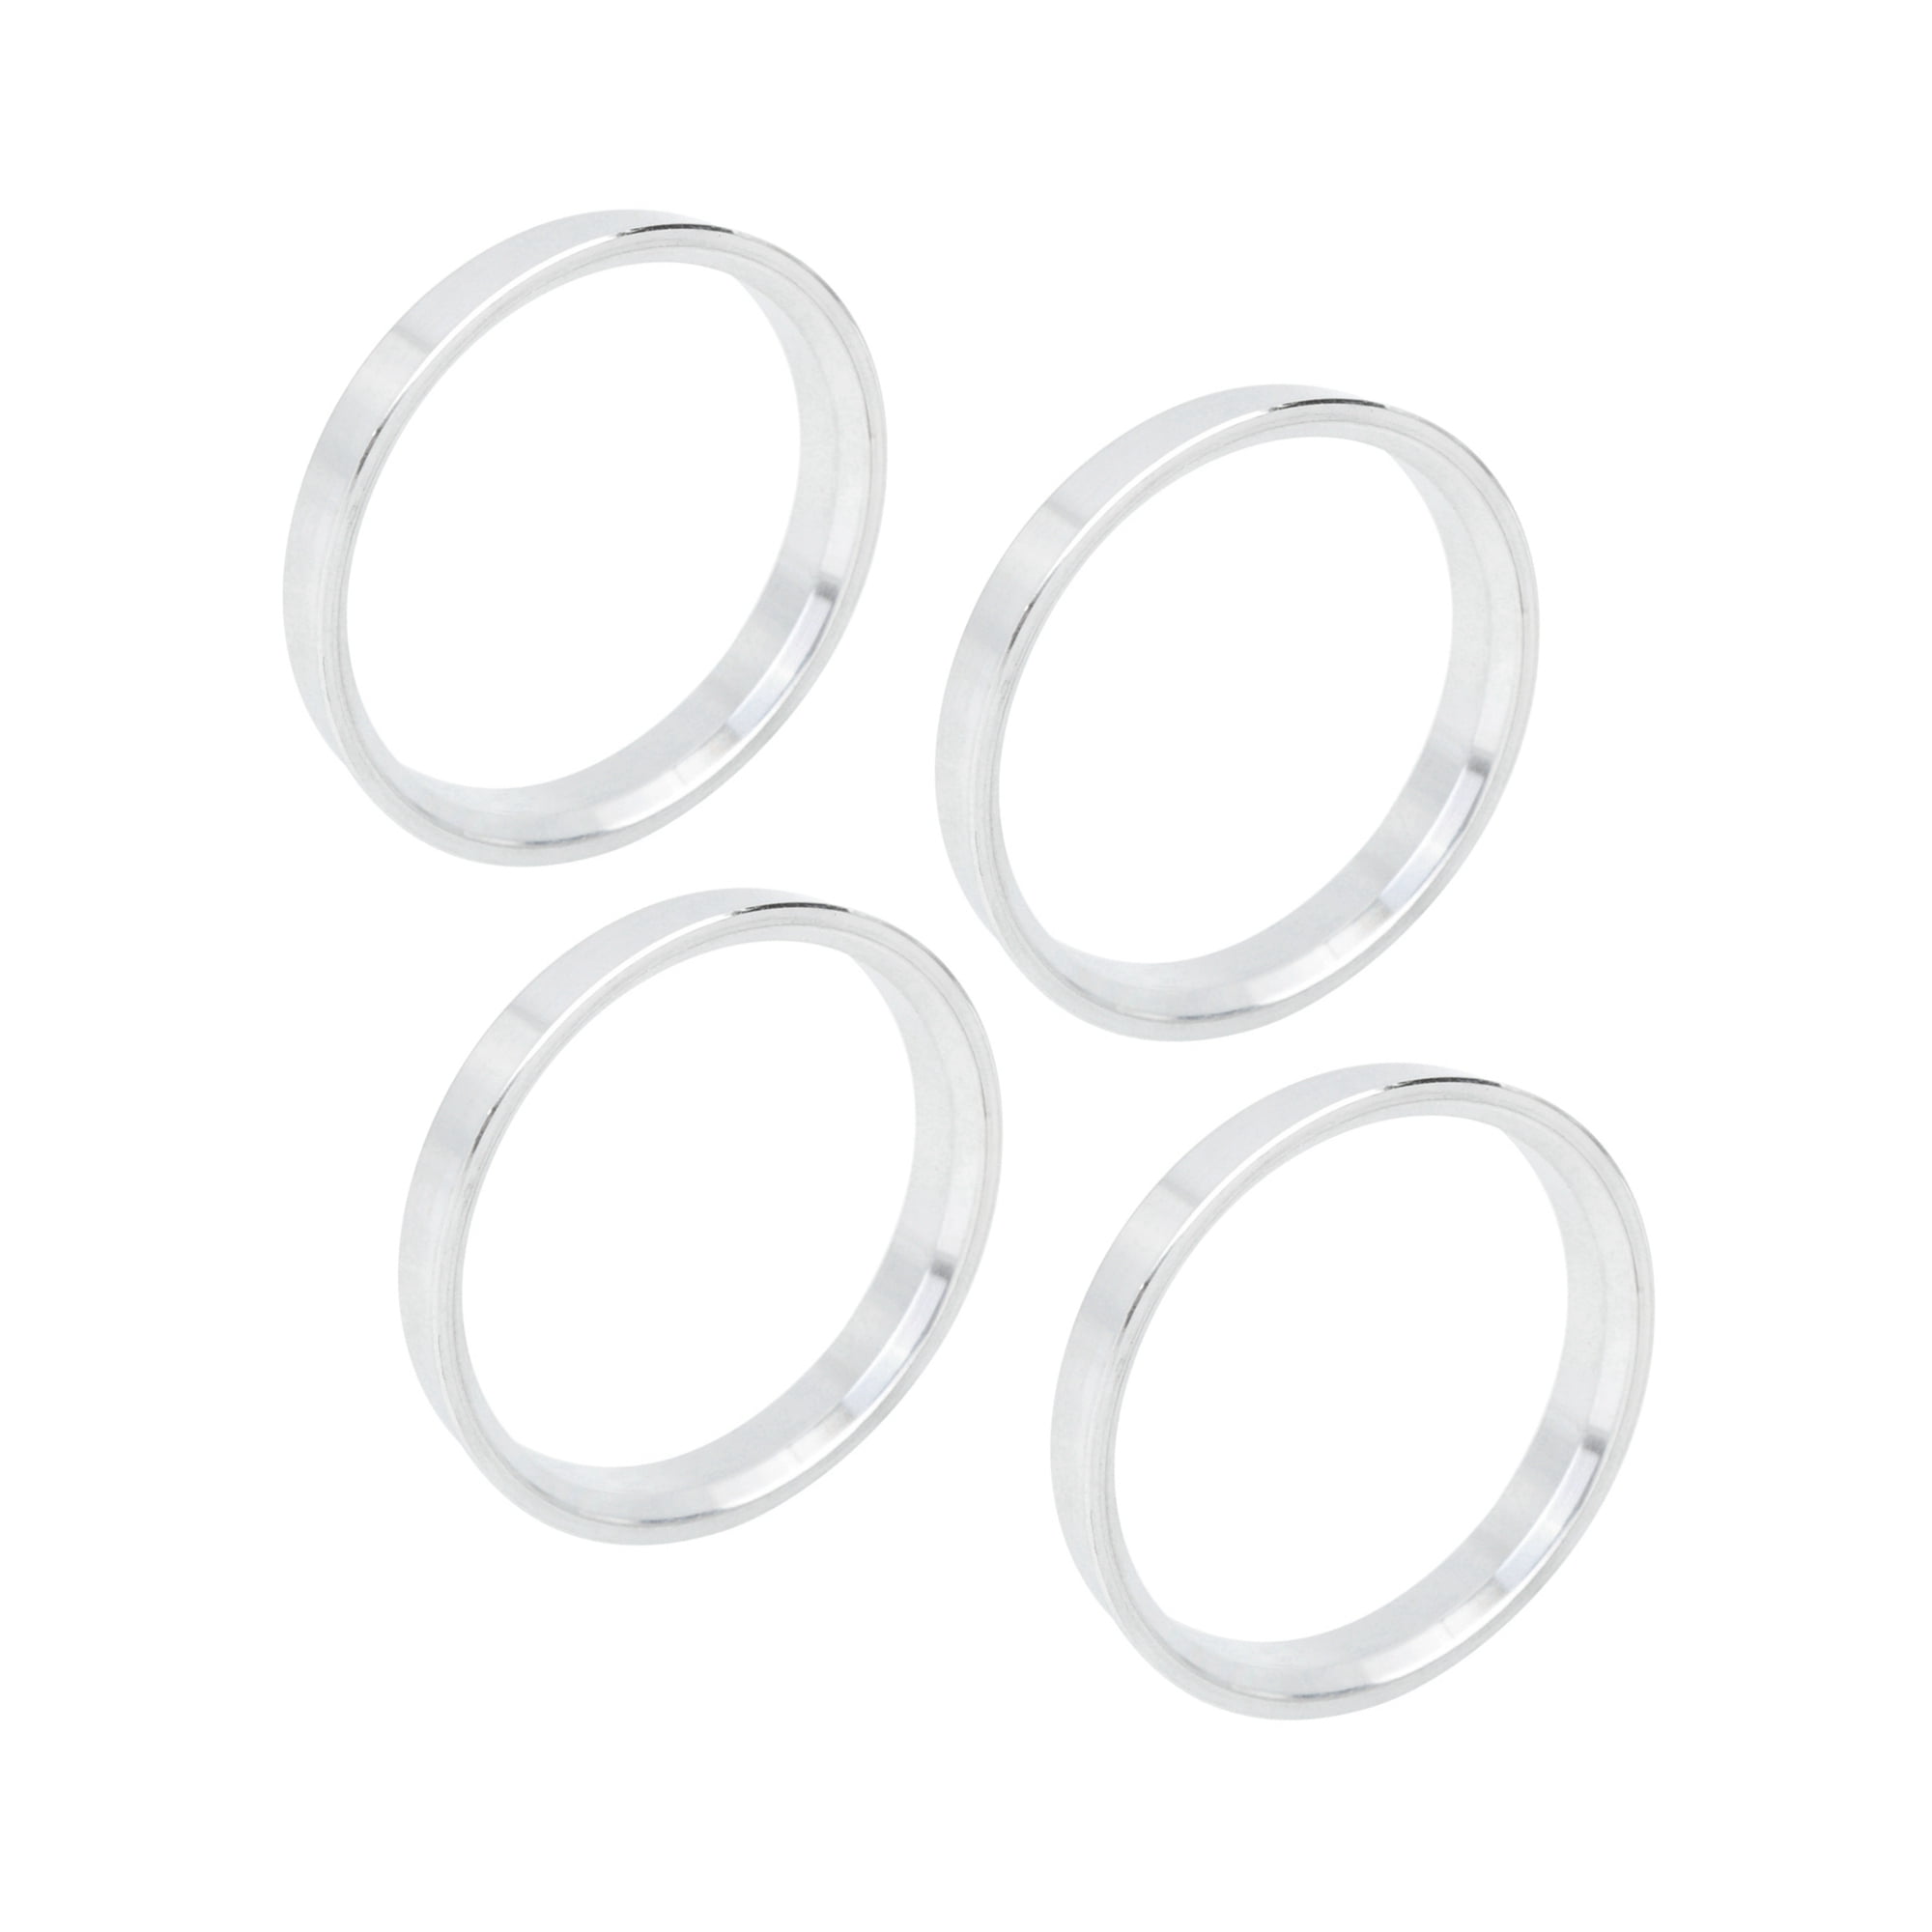 A set of 4pcs Plastic HUB CENTRIC HUBCENTRIC RING RINGS ID 64.1mm to OD 78.1mm 